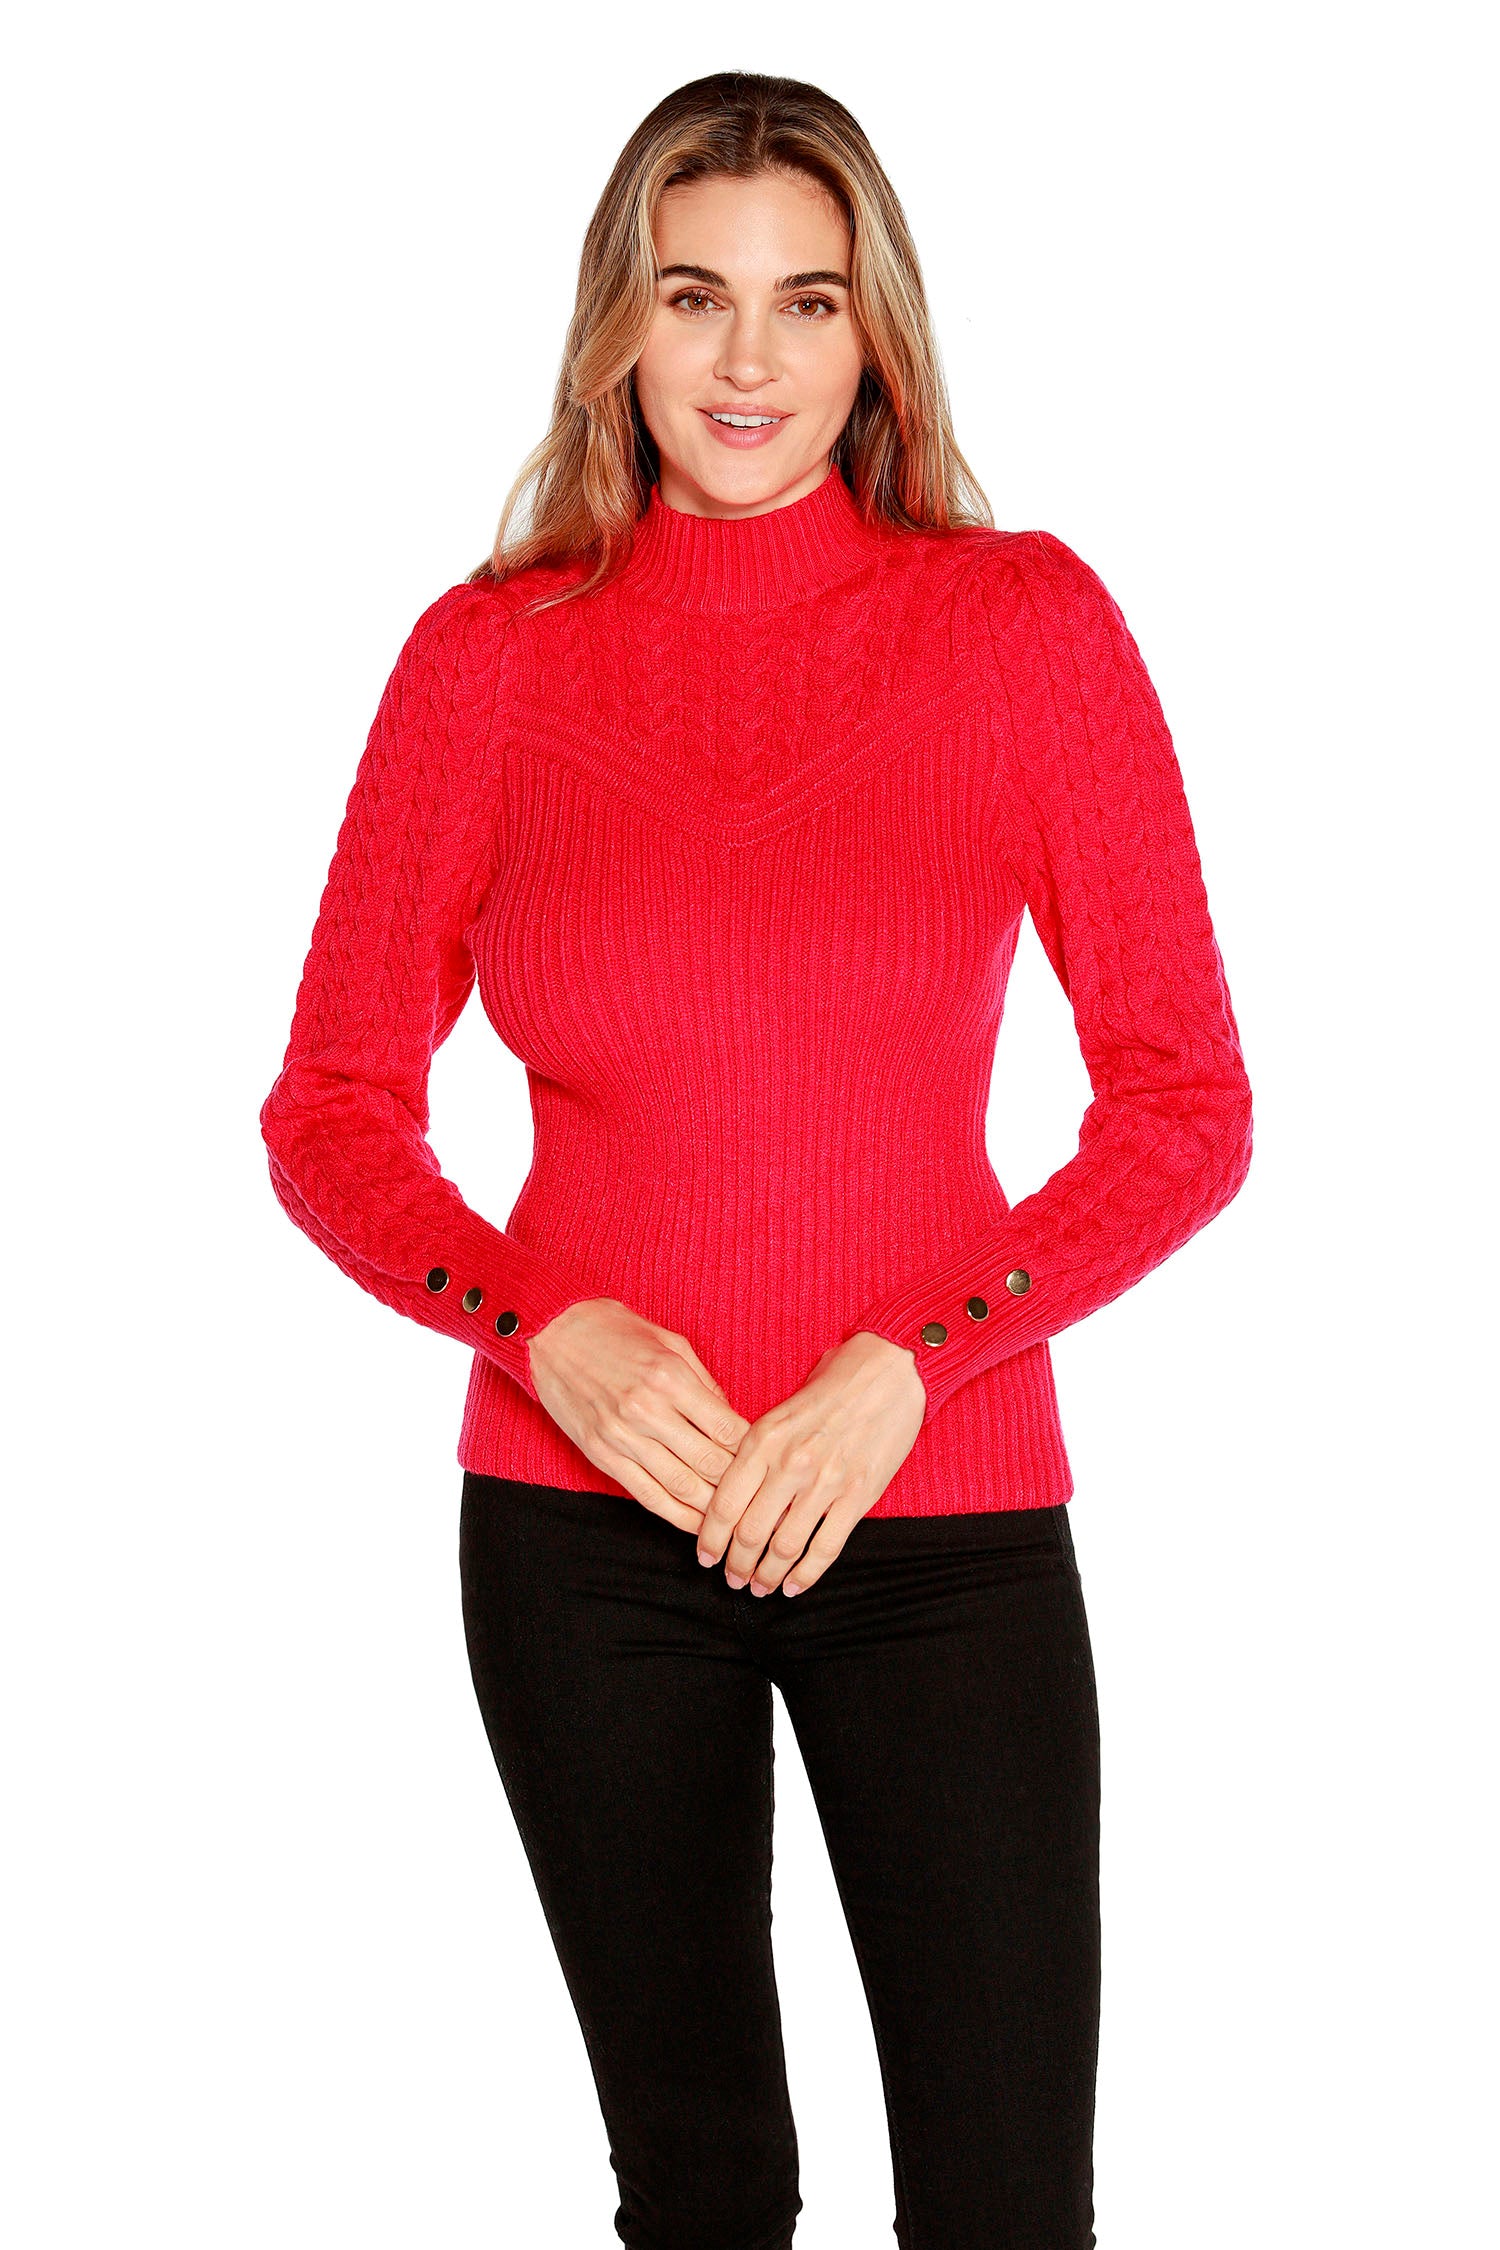 Women's Mock Neck Sweater with Sweetheart Cable Knit and Puff Bishop Sleeves